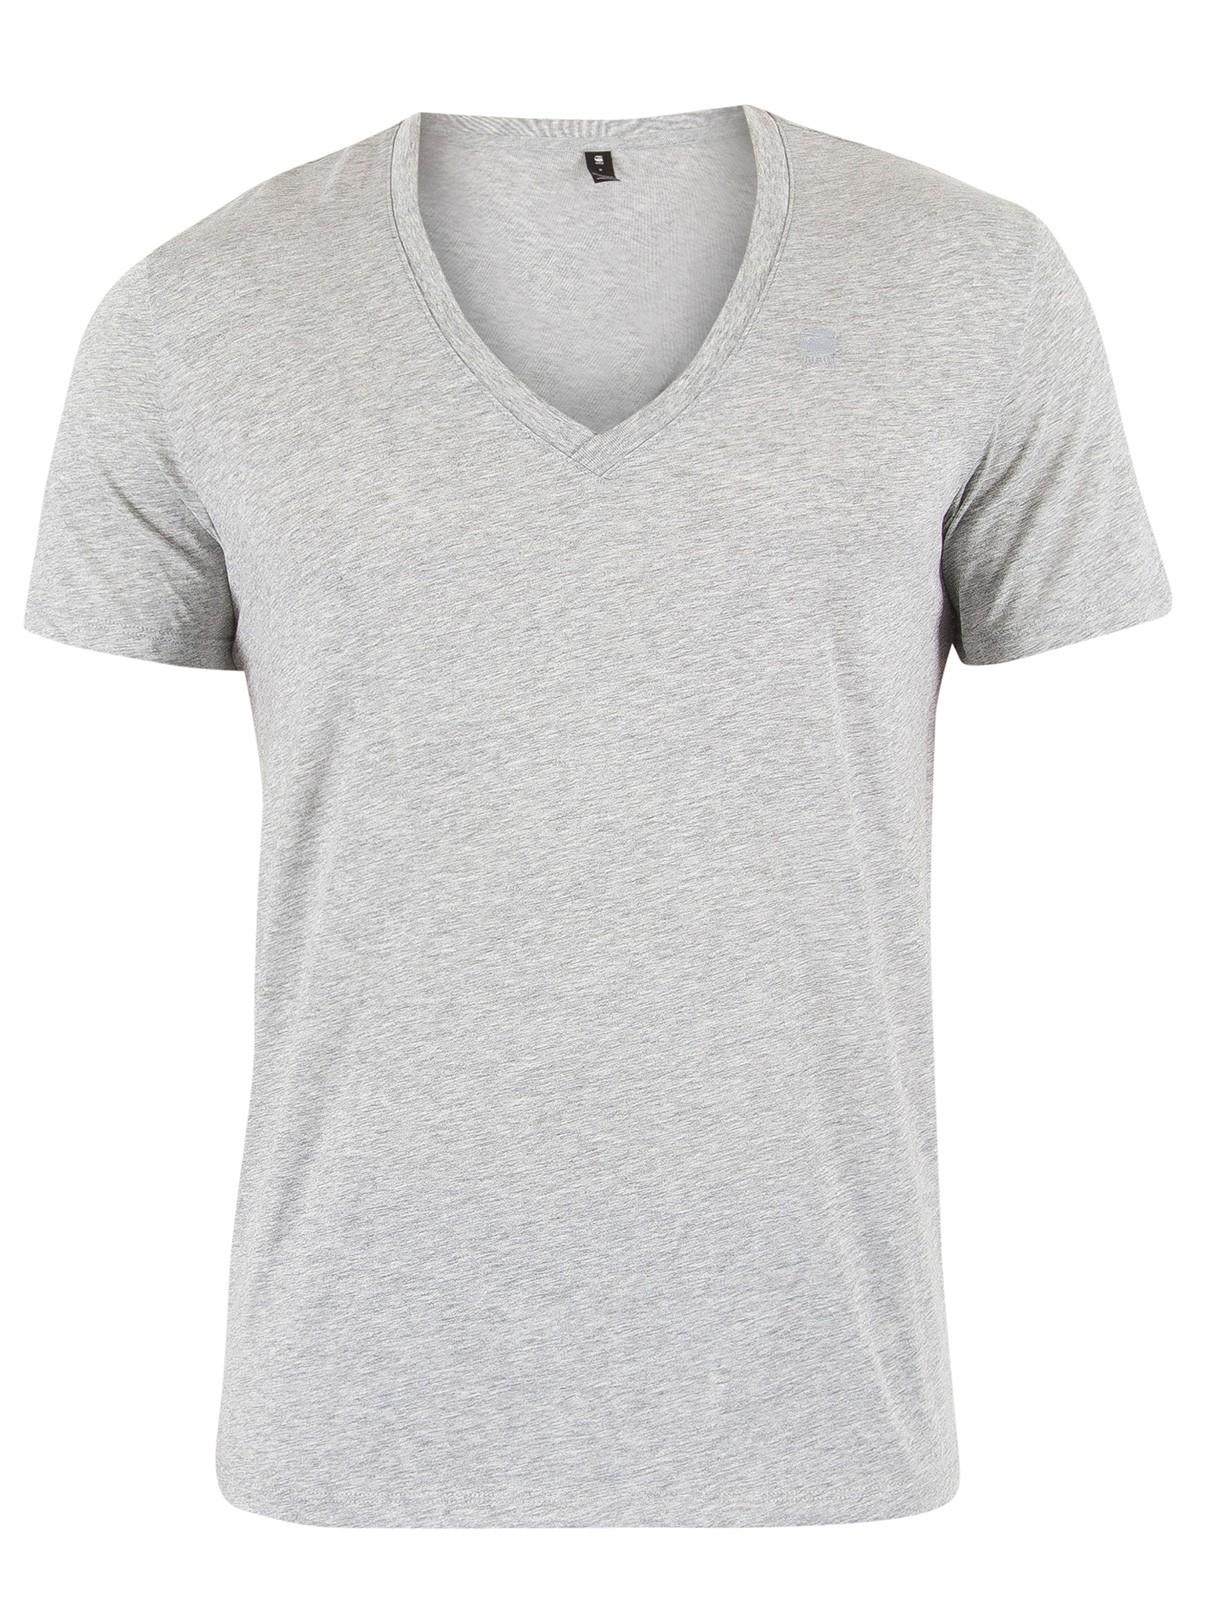 G-Star RAW Cotton 2 Pack V-neck Logo T-shirts in Grey Heather (Gray) for  Men - Lyst